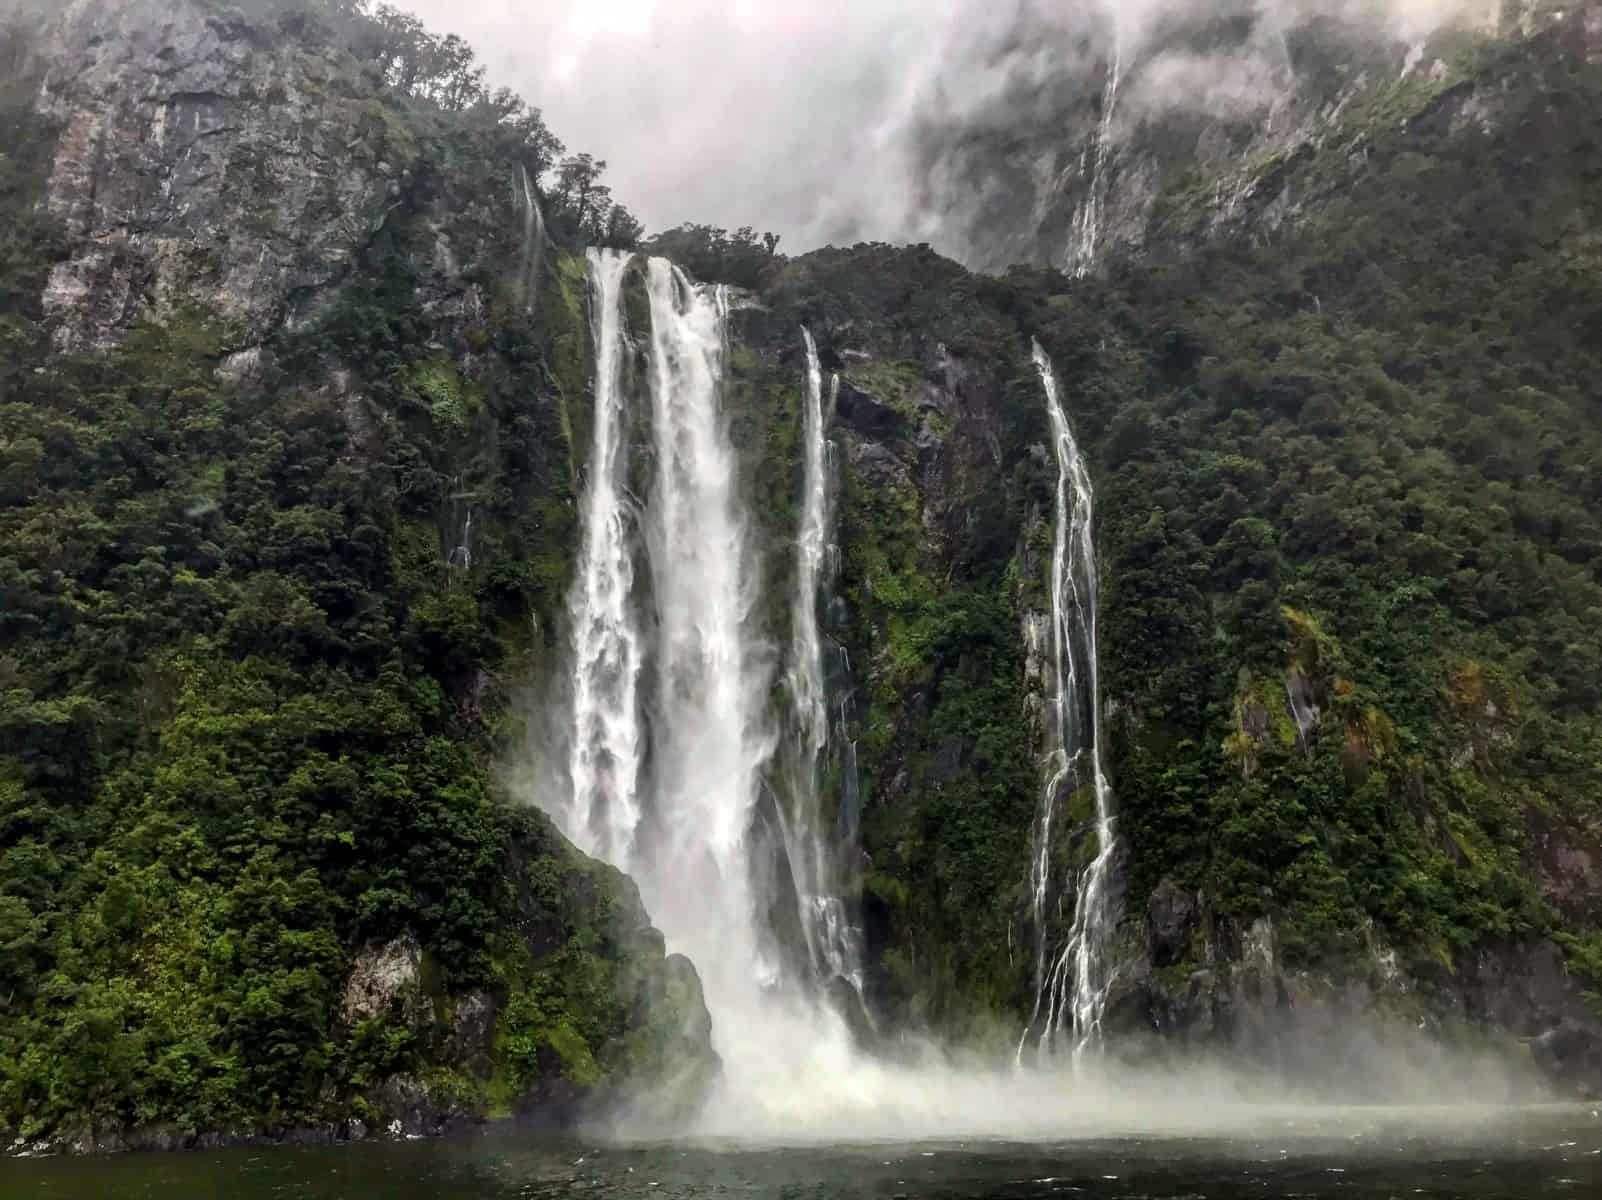 'Eighth Wonder of the World' a.k.a Milford Sound